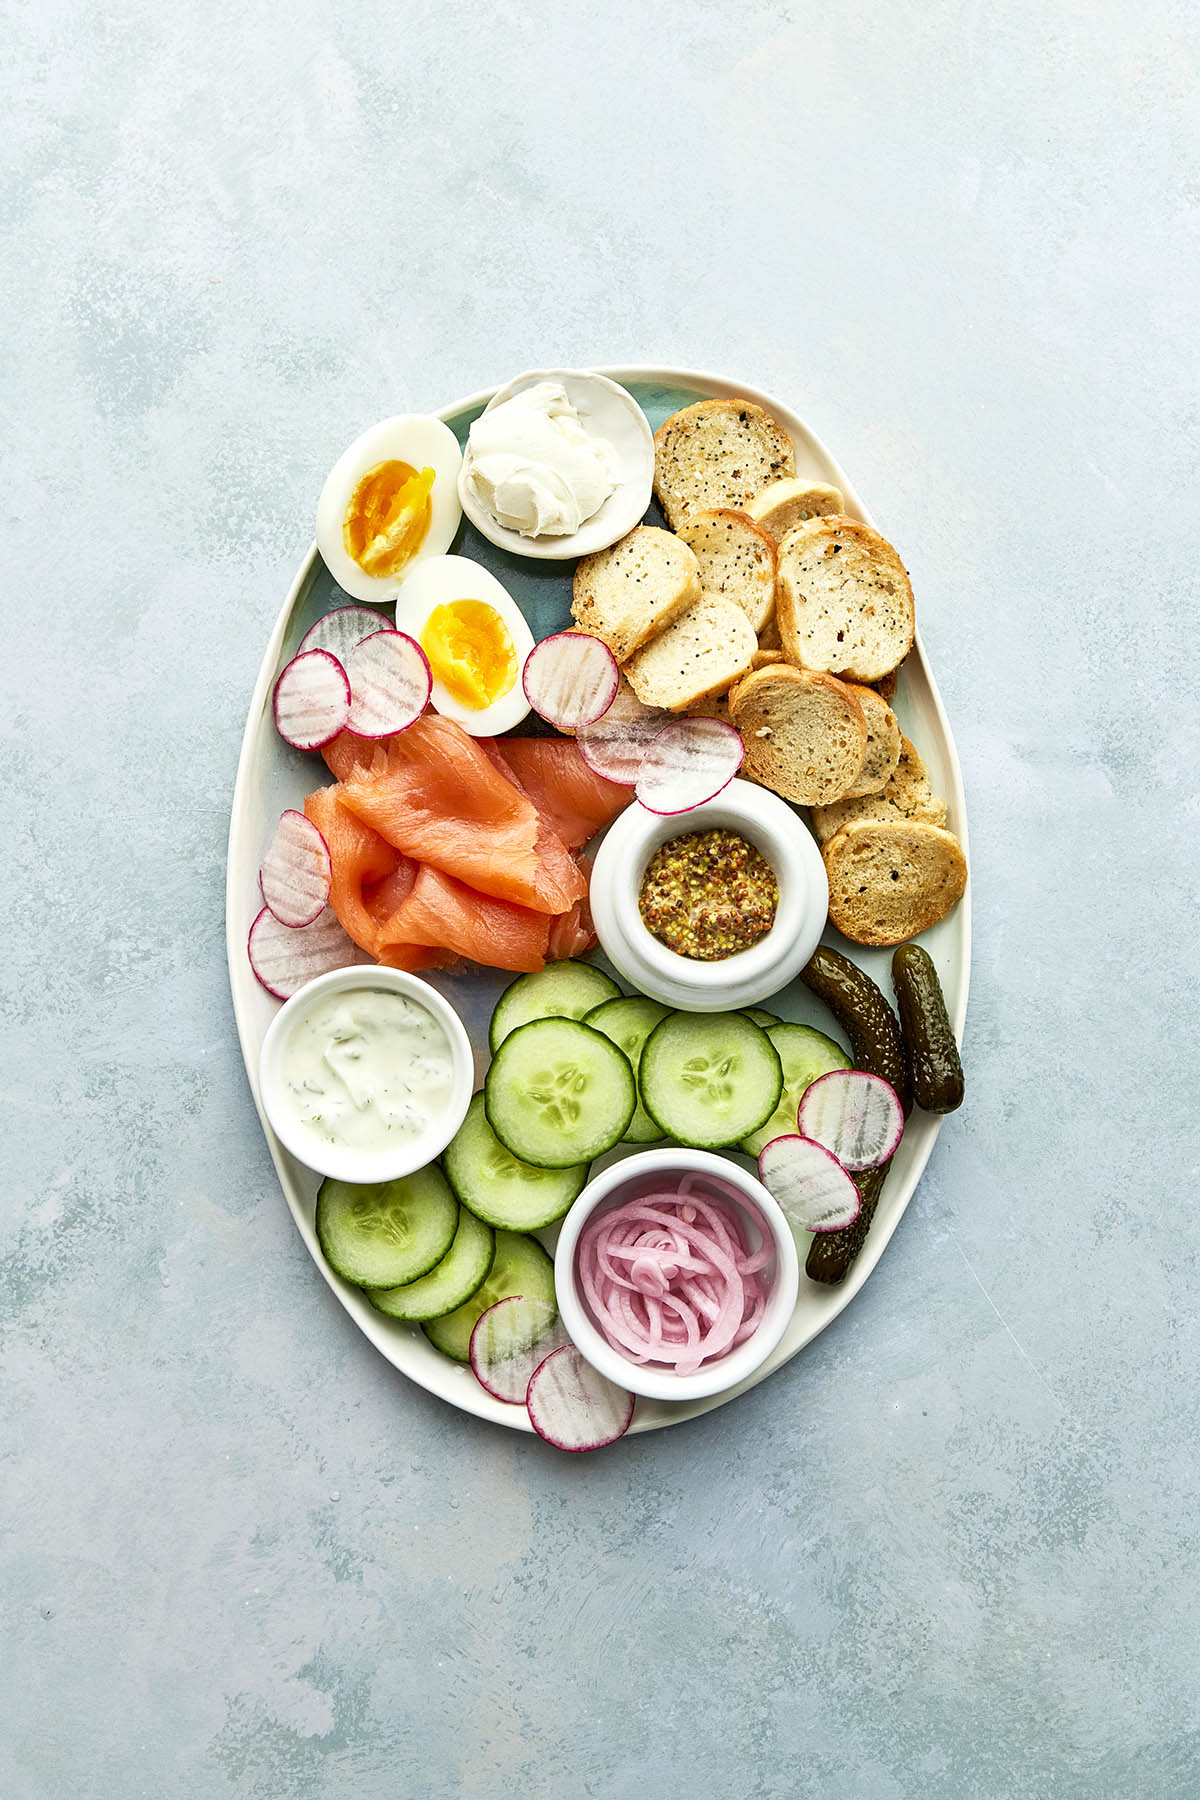 The fifth step of this smoked salmon platter recipe.